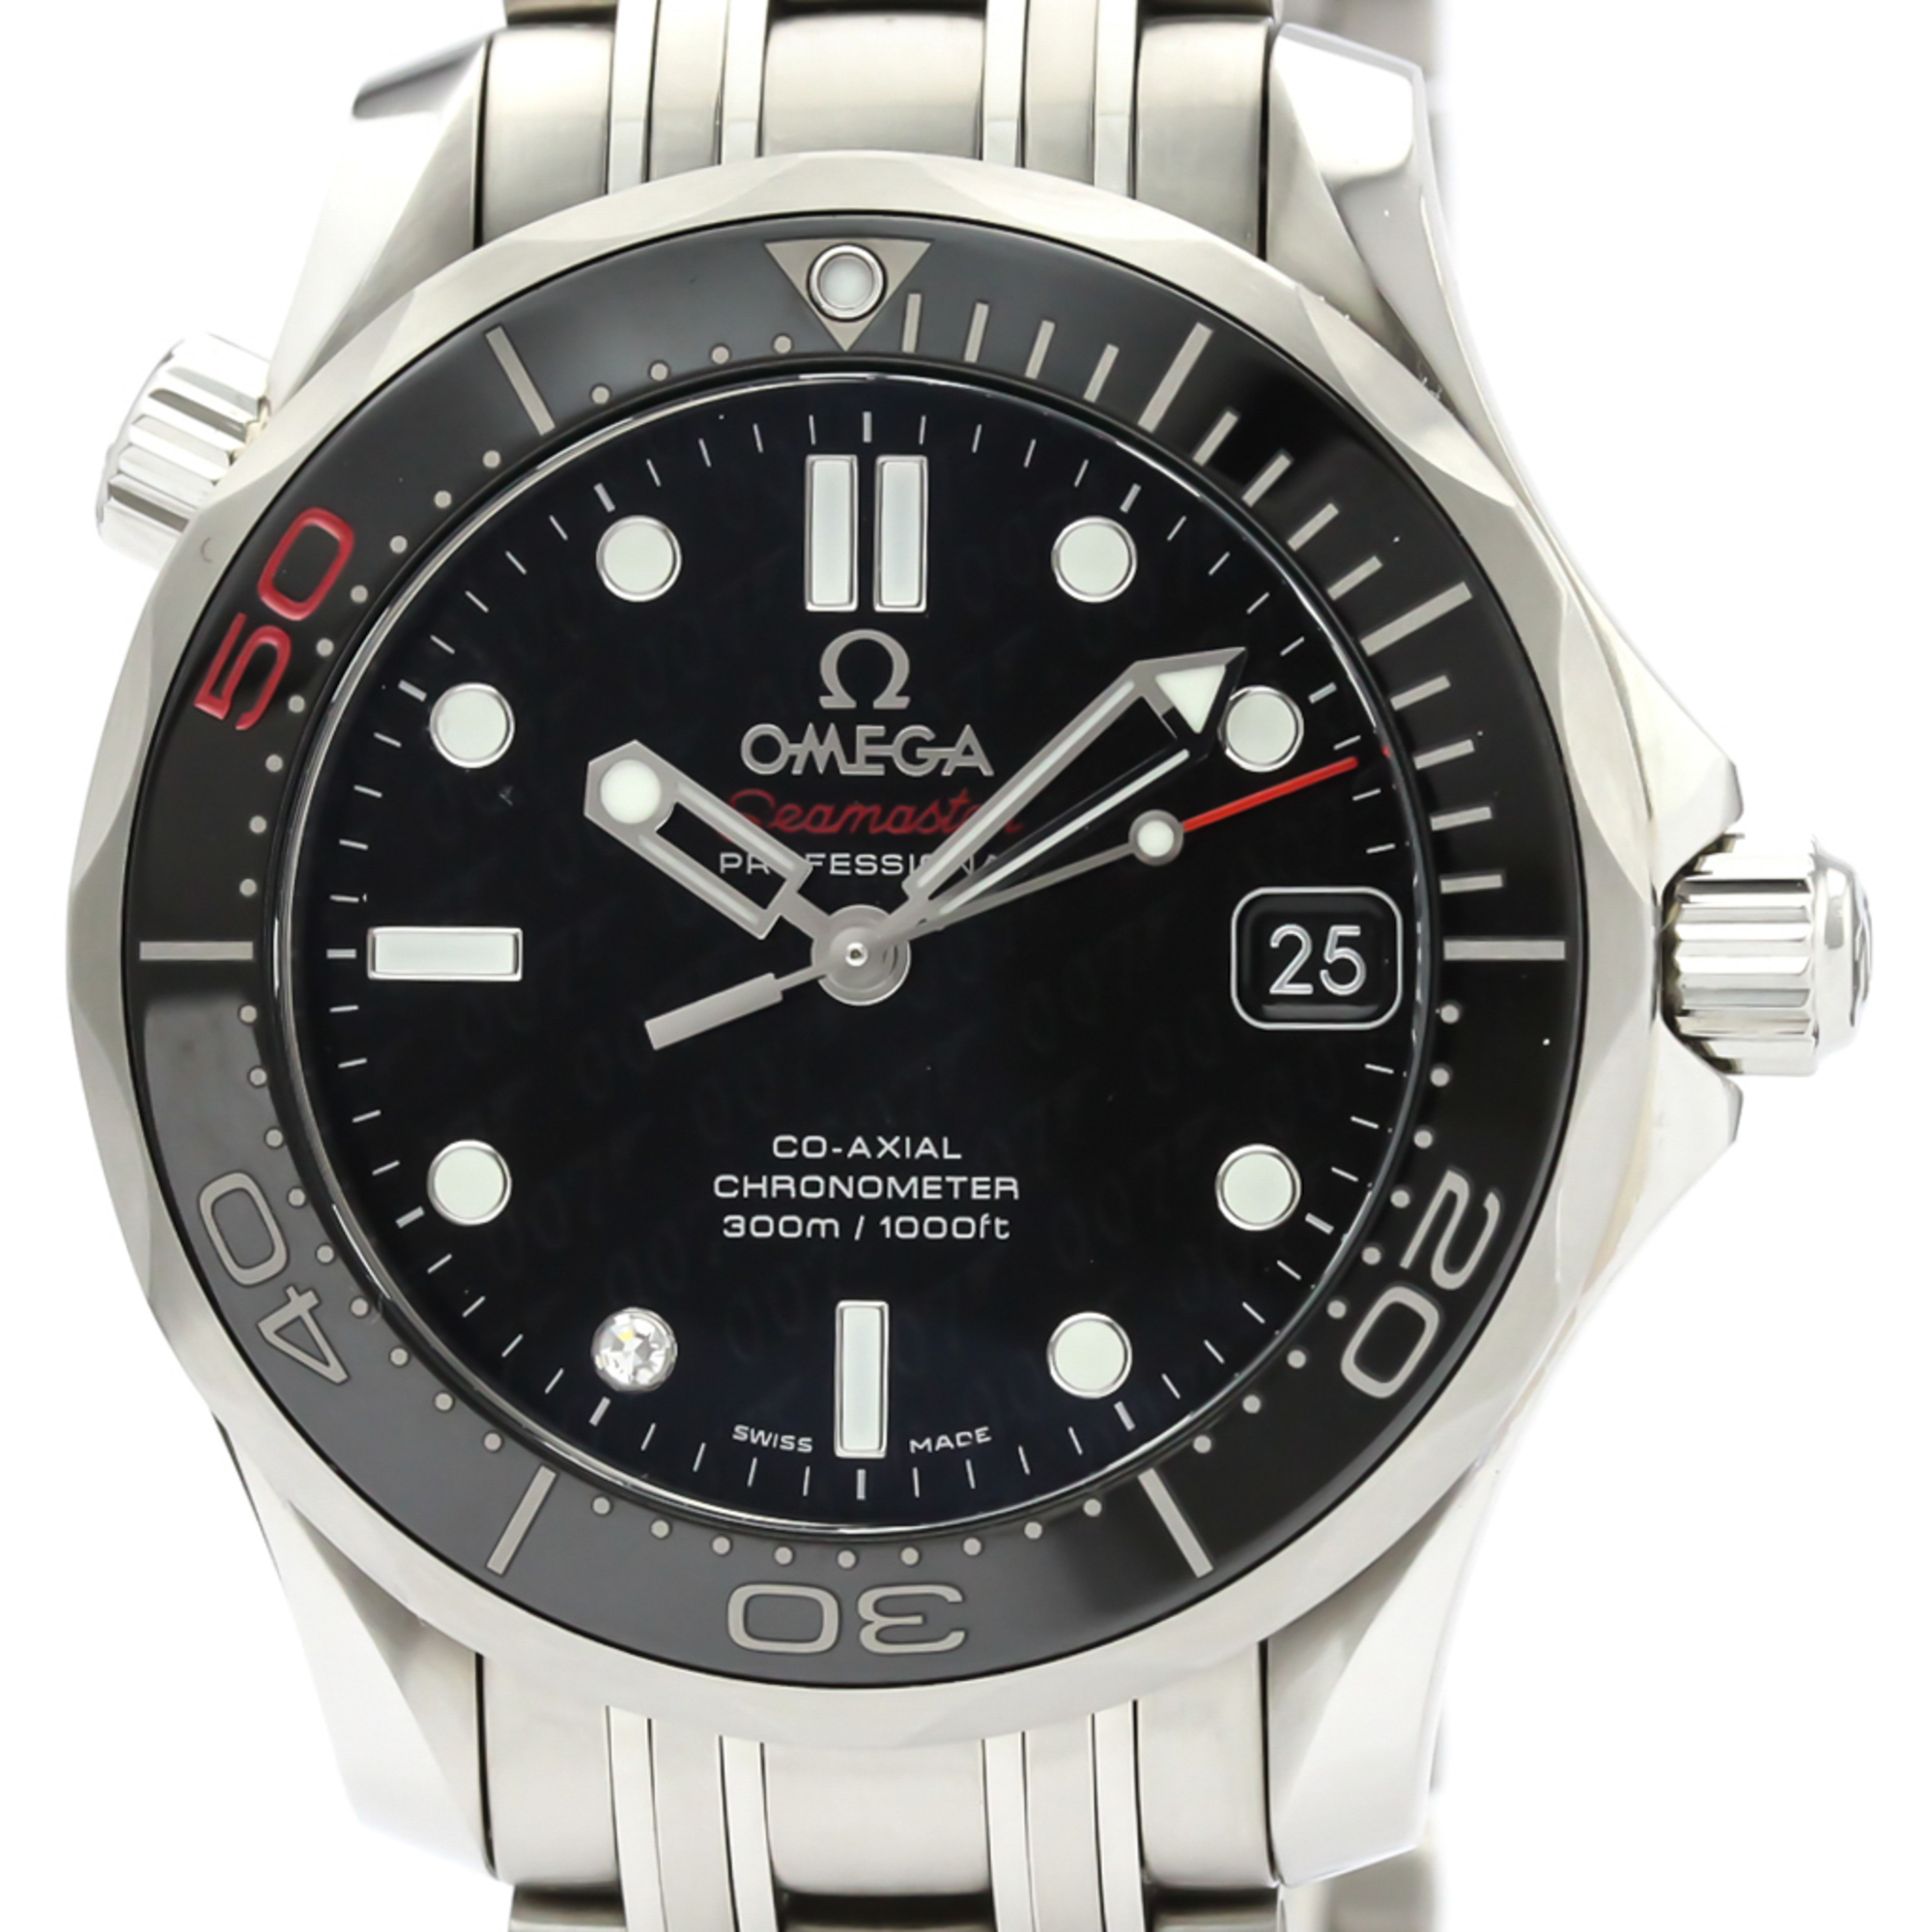 Omega Seamaster Automatic Stainless Steel Men's Sports Watch 212.30.36.20.51.001